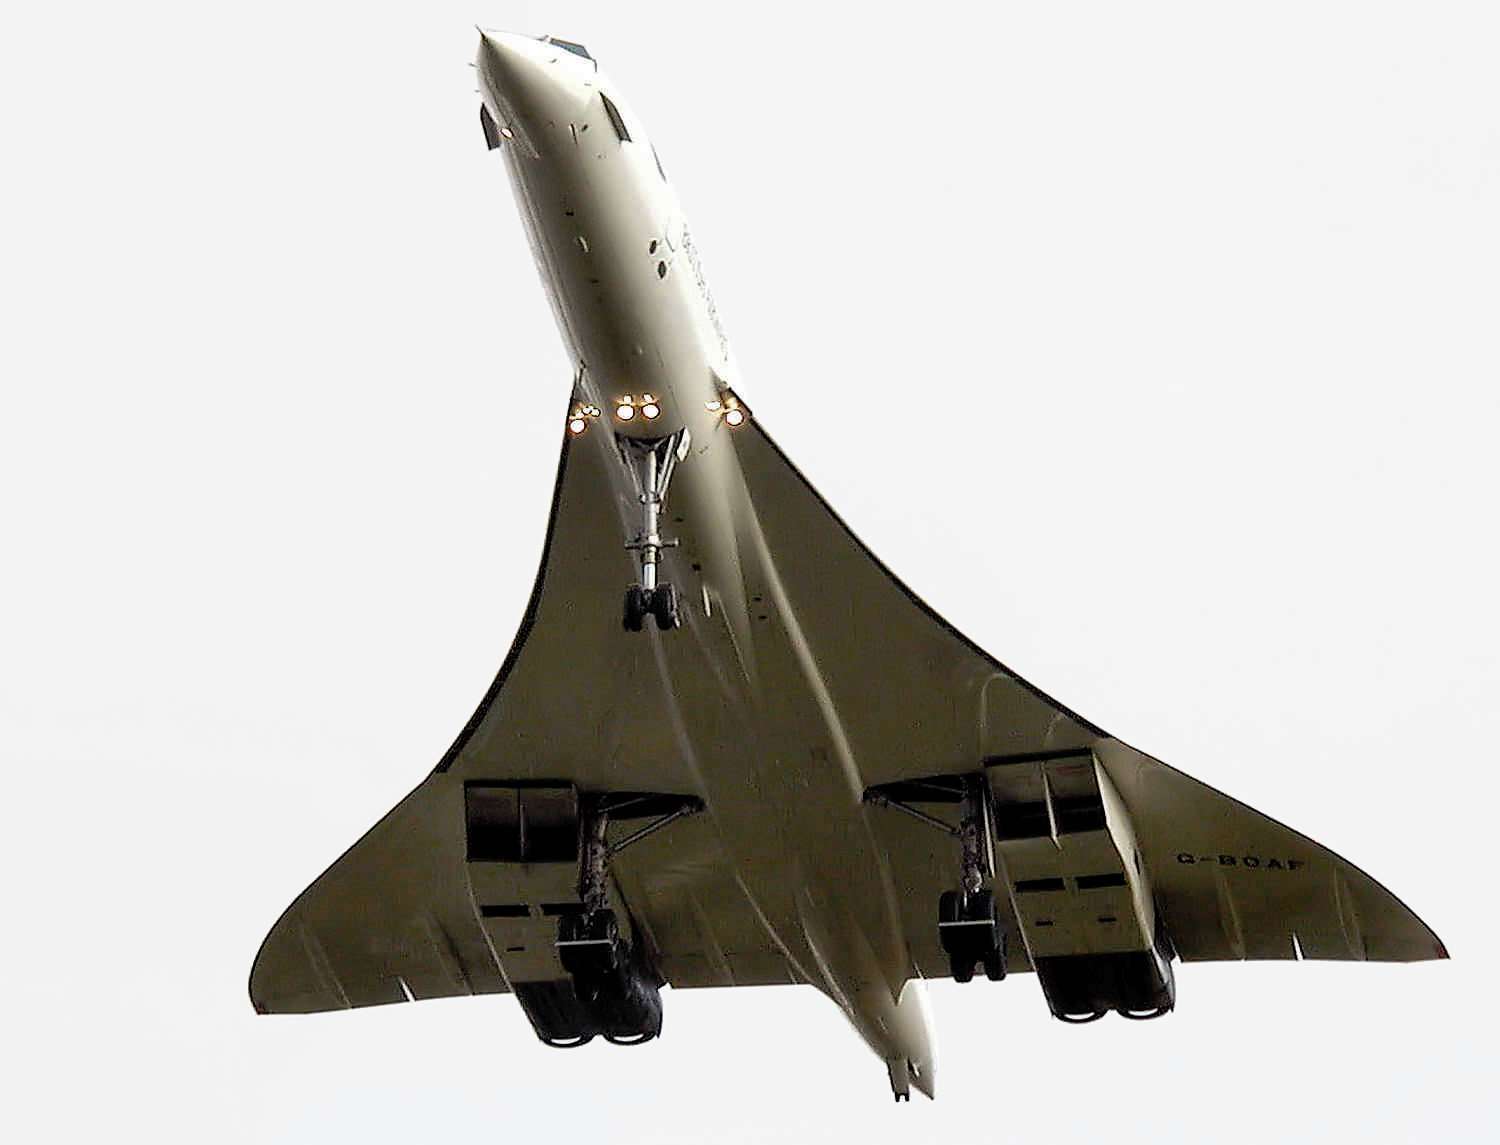 What Routes Did British Airways Operate Using Concorde?